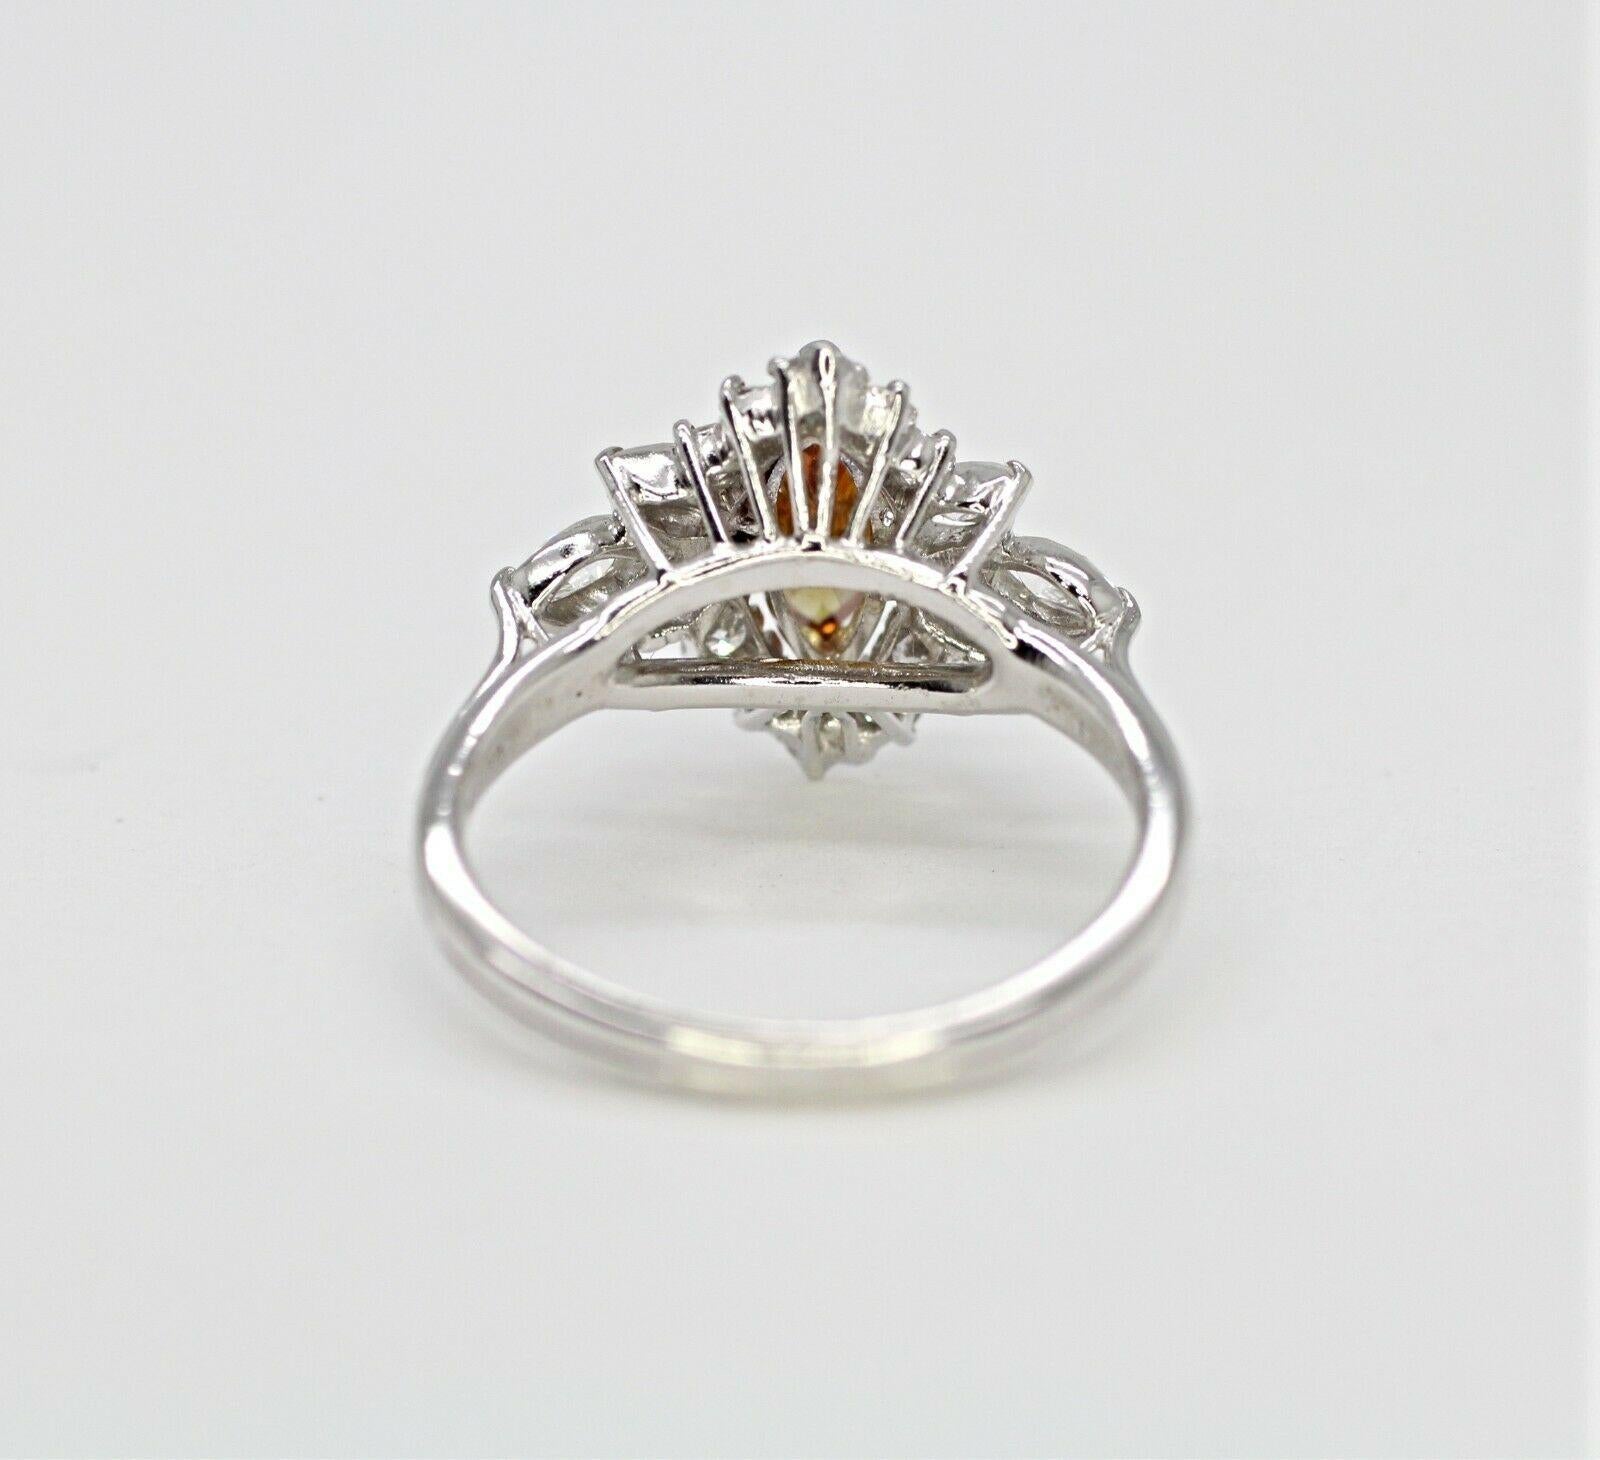 Contemporary Marquise Brilliant Fancy Orangy-Brown Color, SI2 in Clarity Diamond Ring